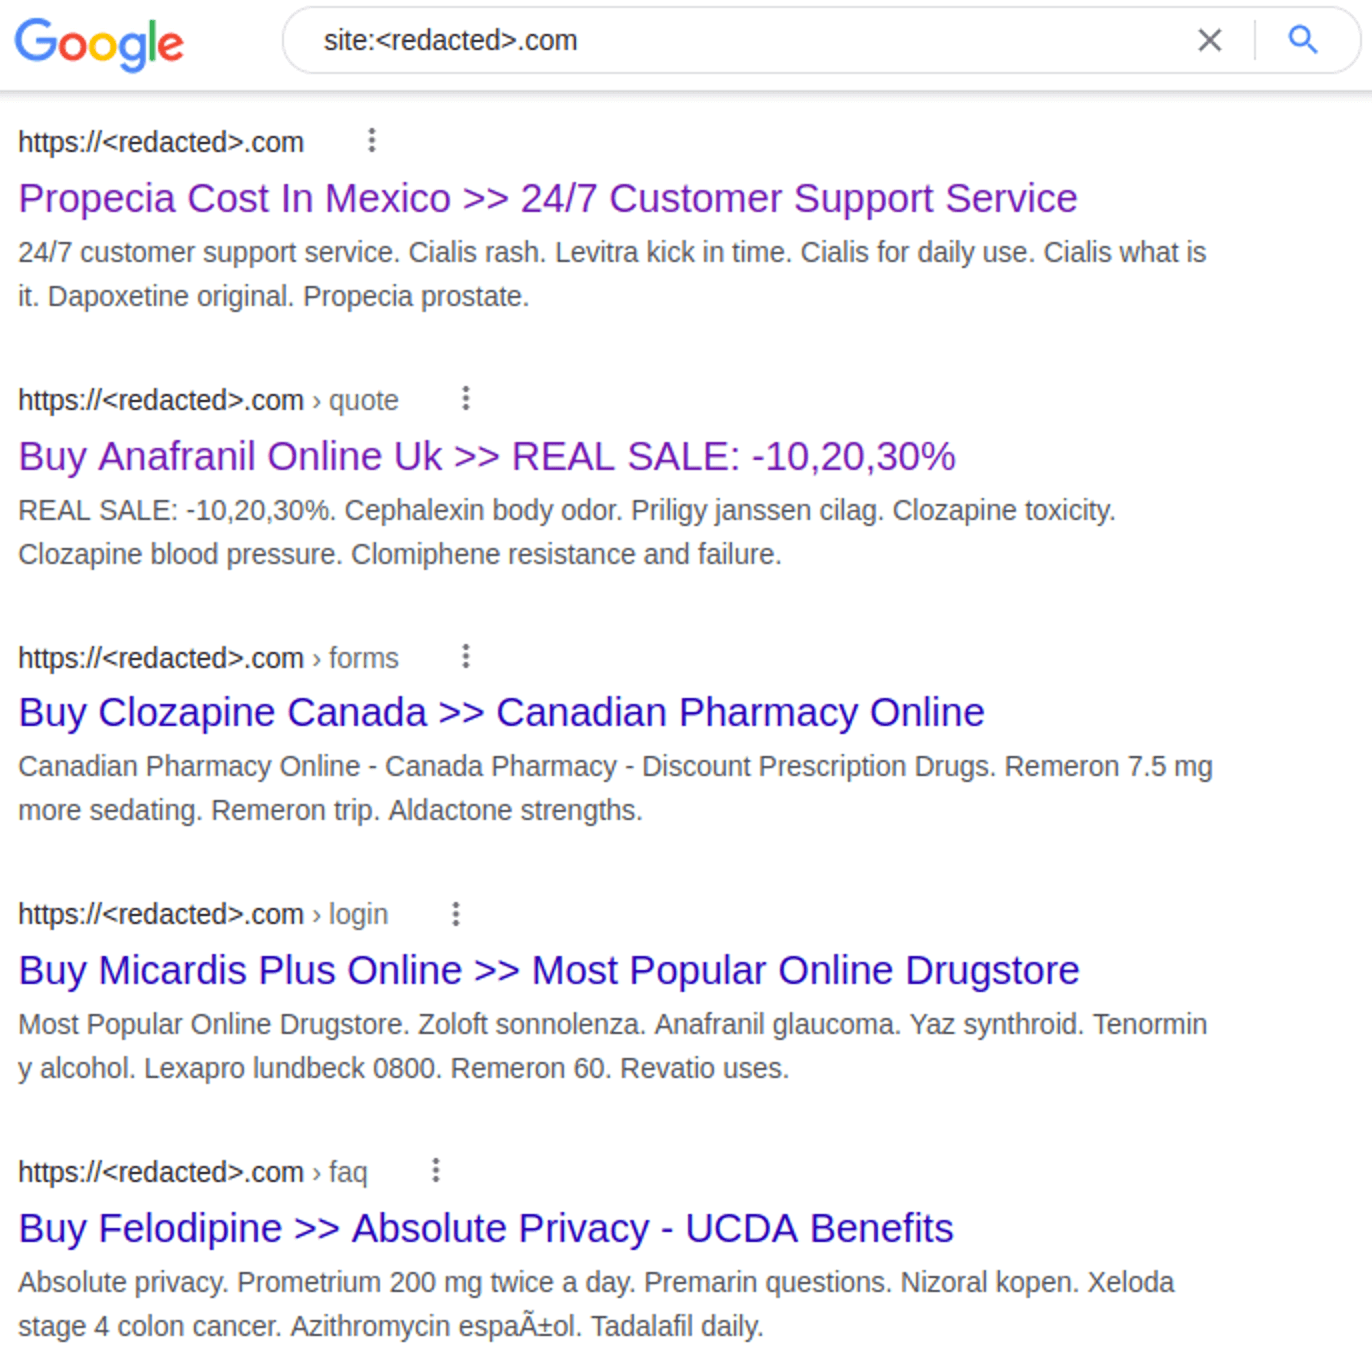 Example of pharmaceutical spam in Google search results after a website is hacked